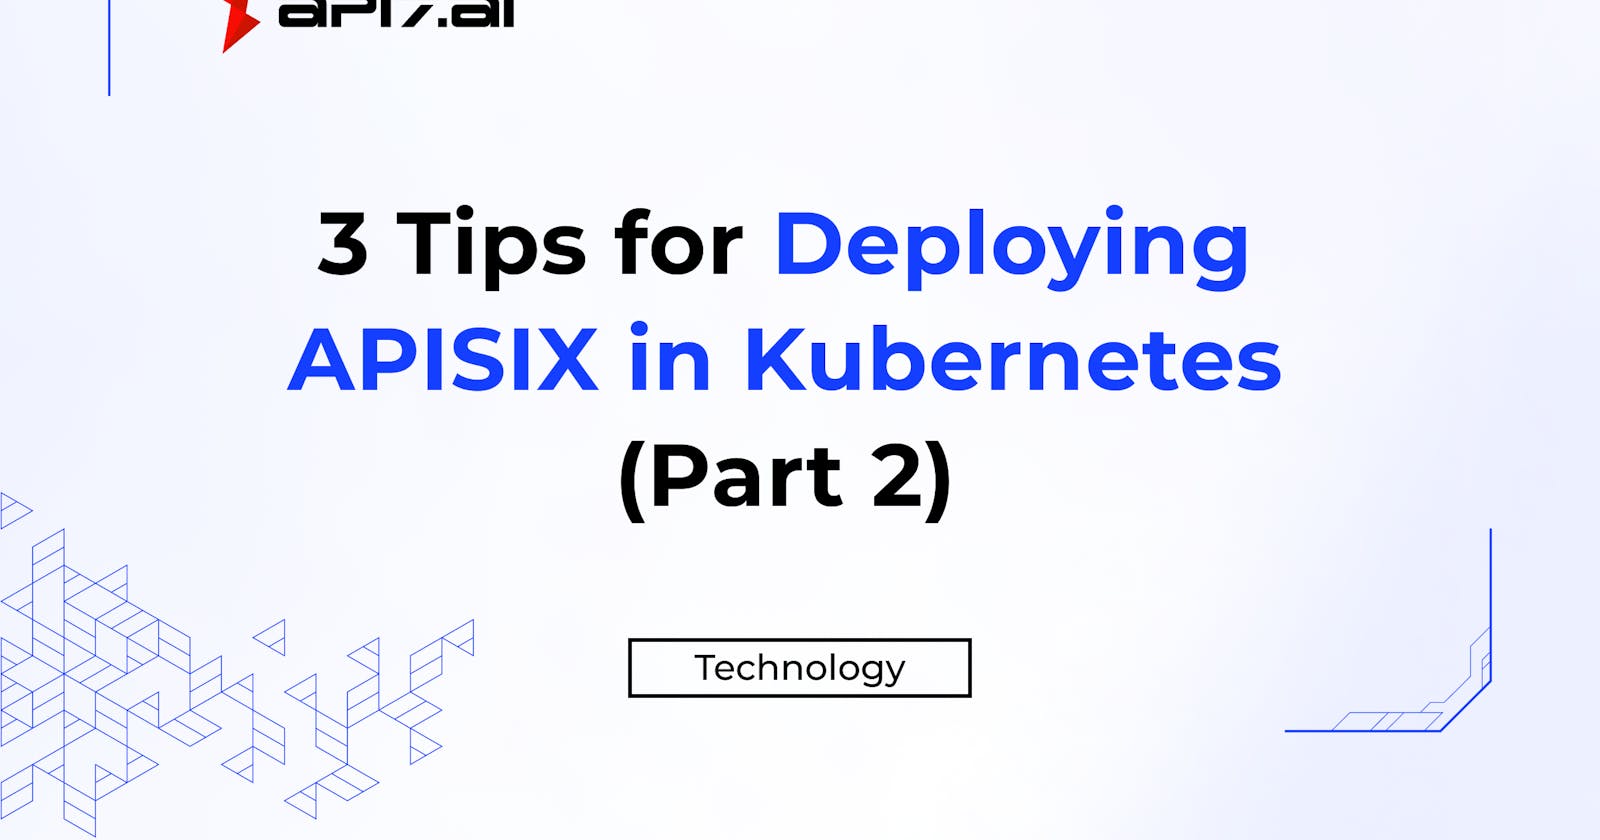 3 Tips for Deploying APISIX in Kubernetes (Part 2)